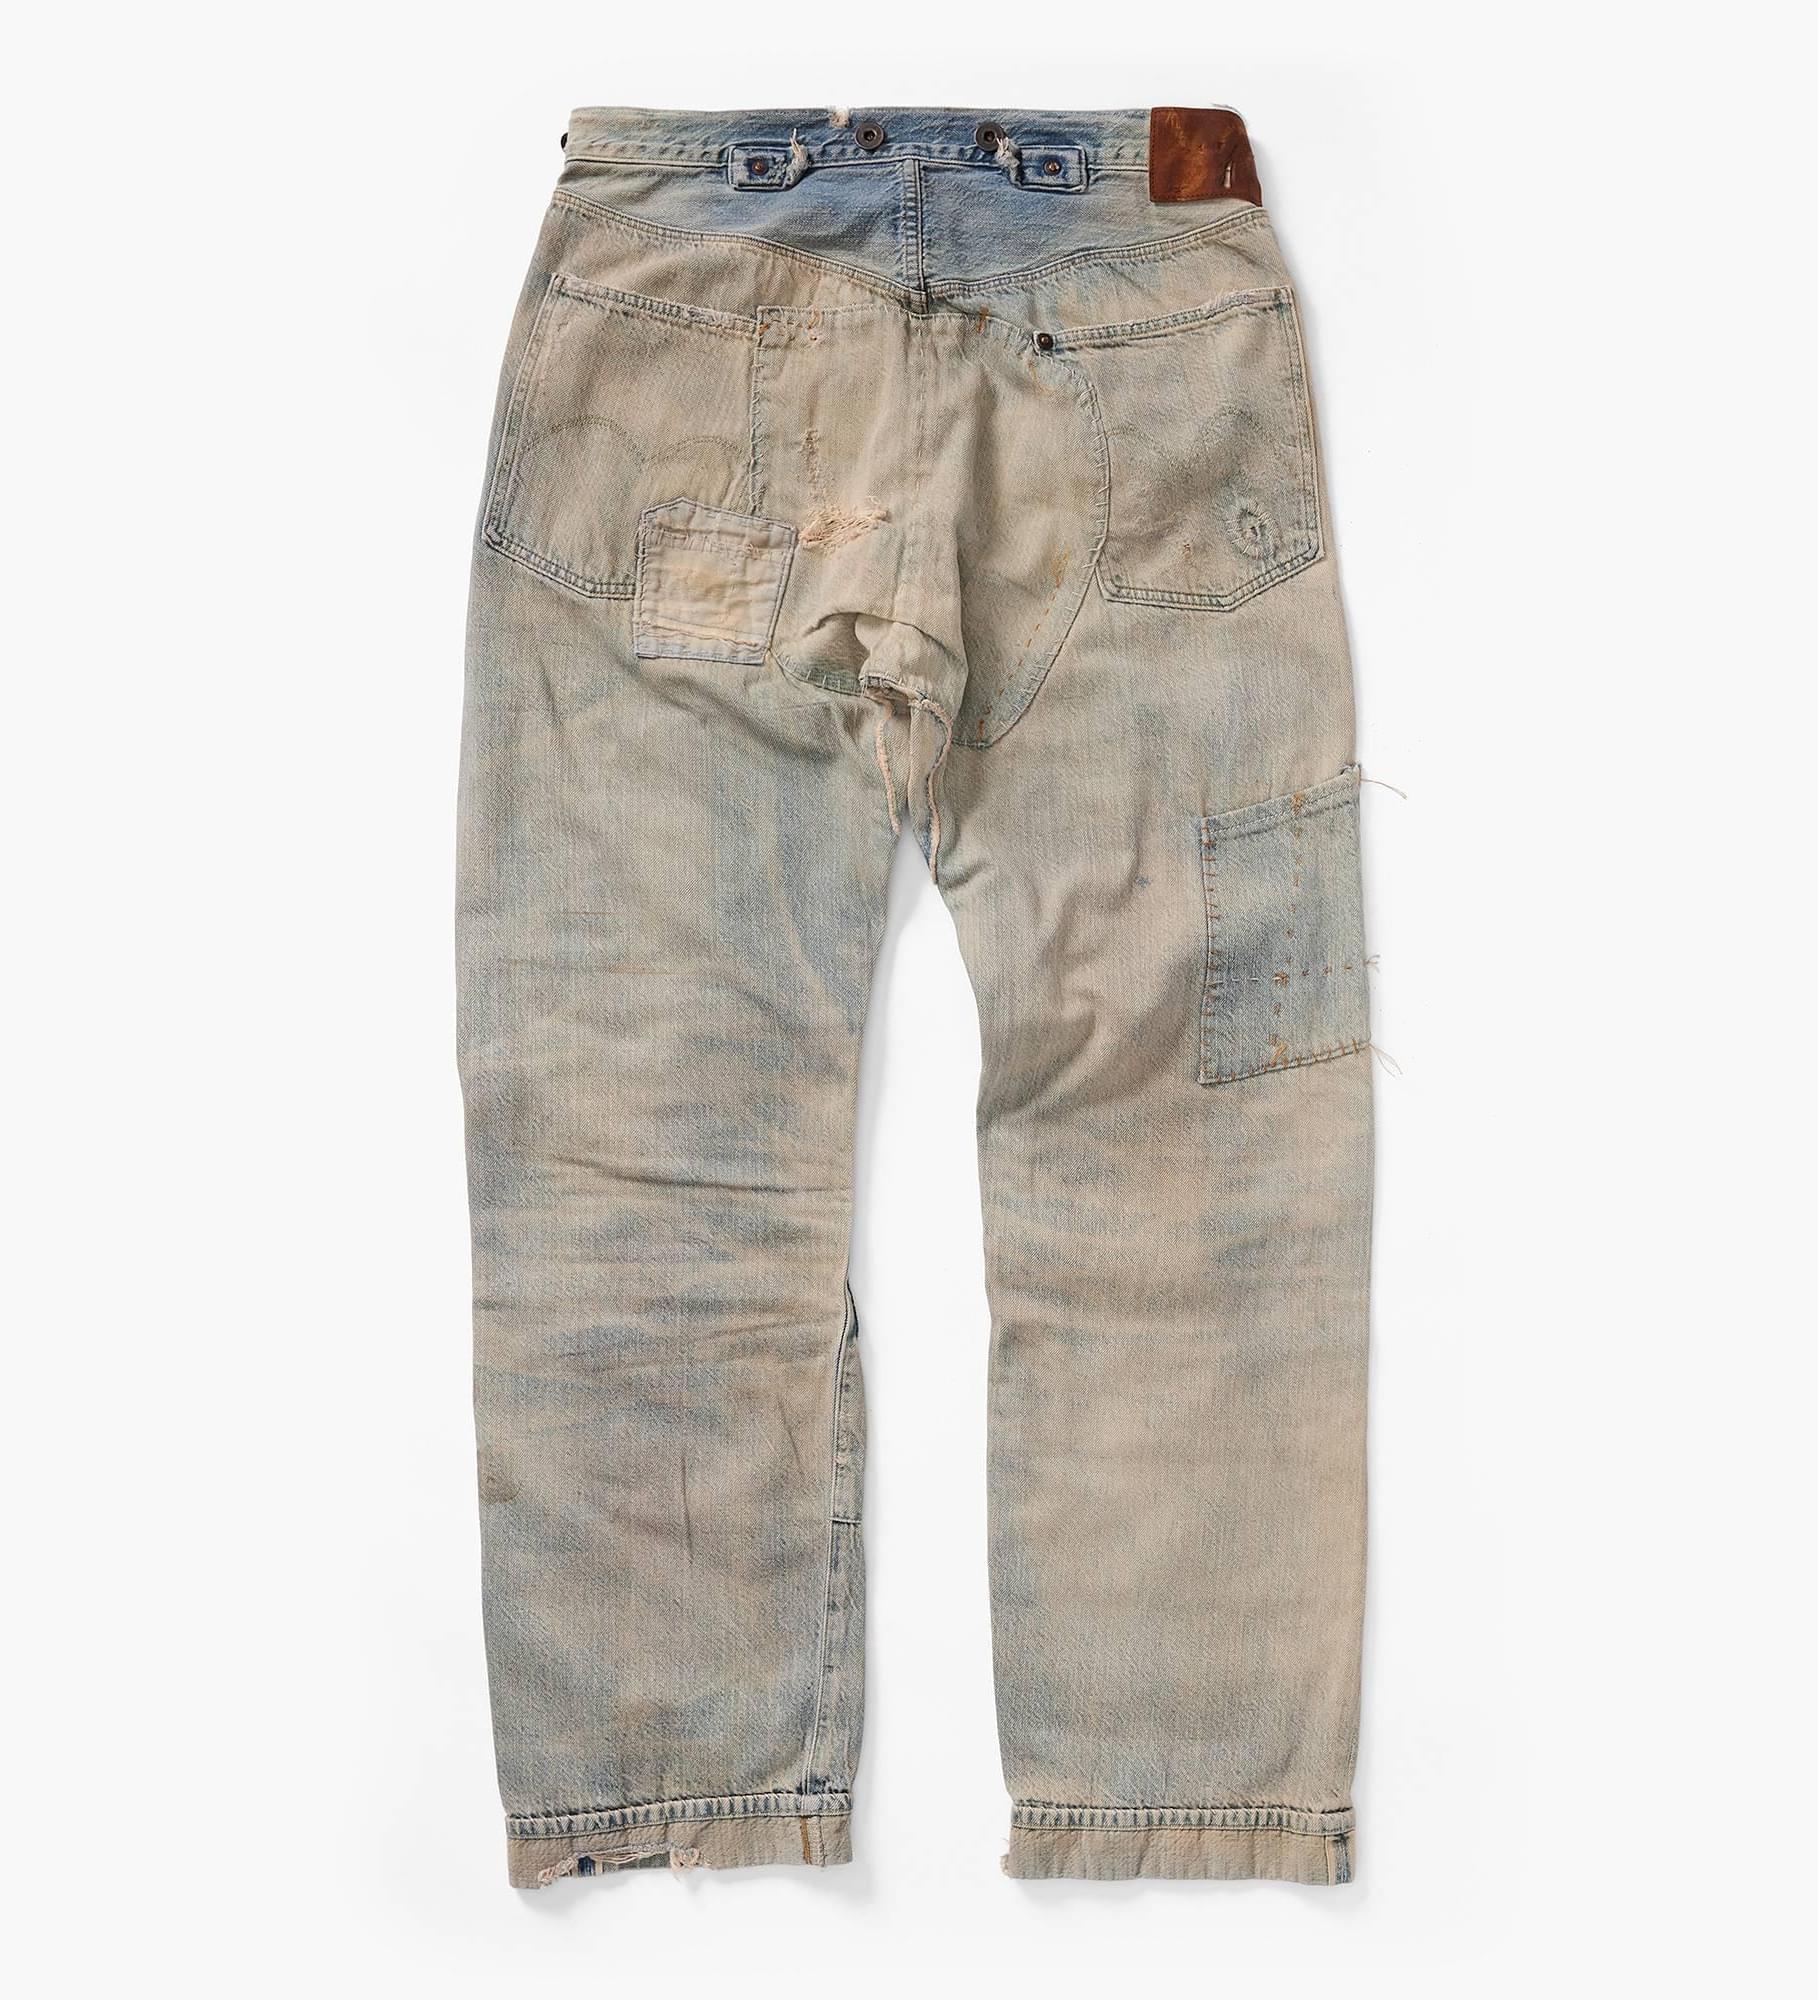 Levi's® Vintage Clothing 1917 Homer Campbell 501® Jeans - Levi's Jeans ...